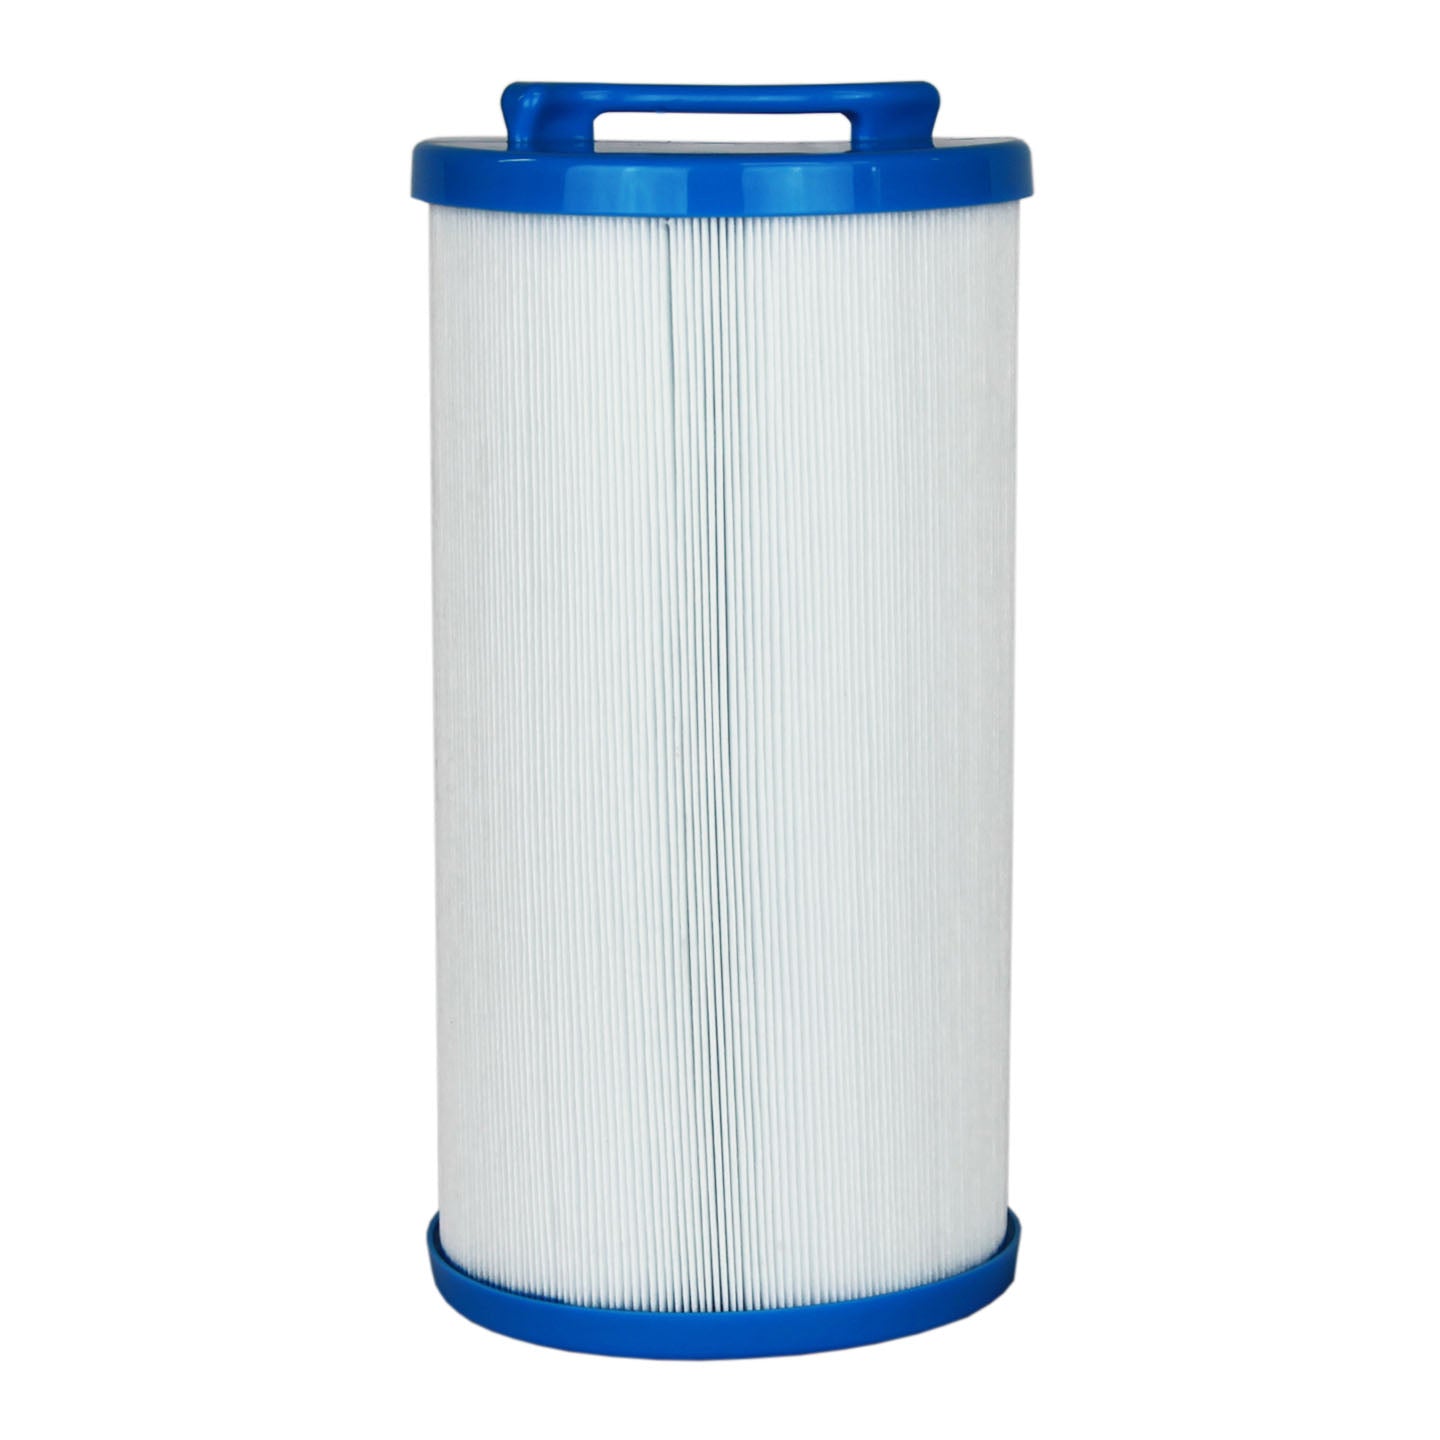 Tier1 Brand Replacement Pool and Spa Filter for 817-4035